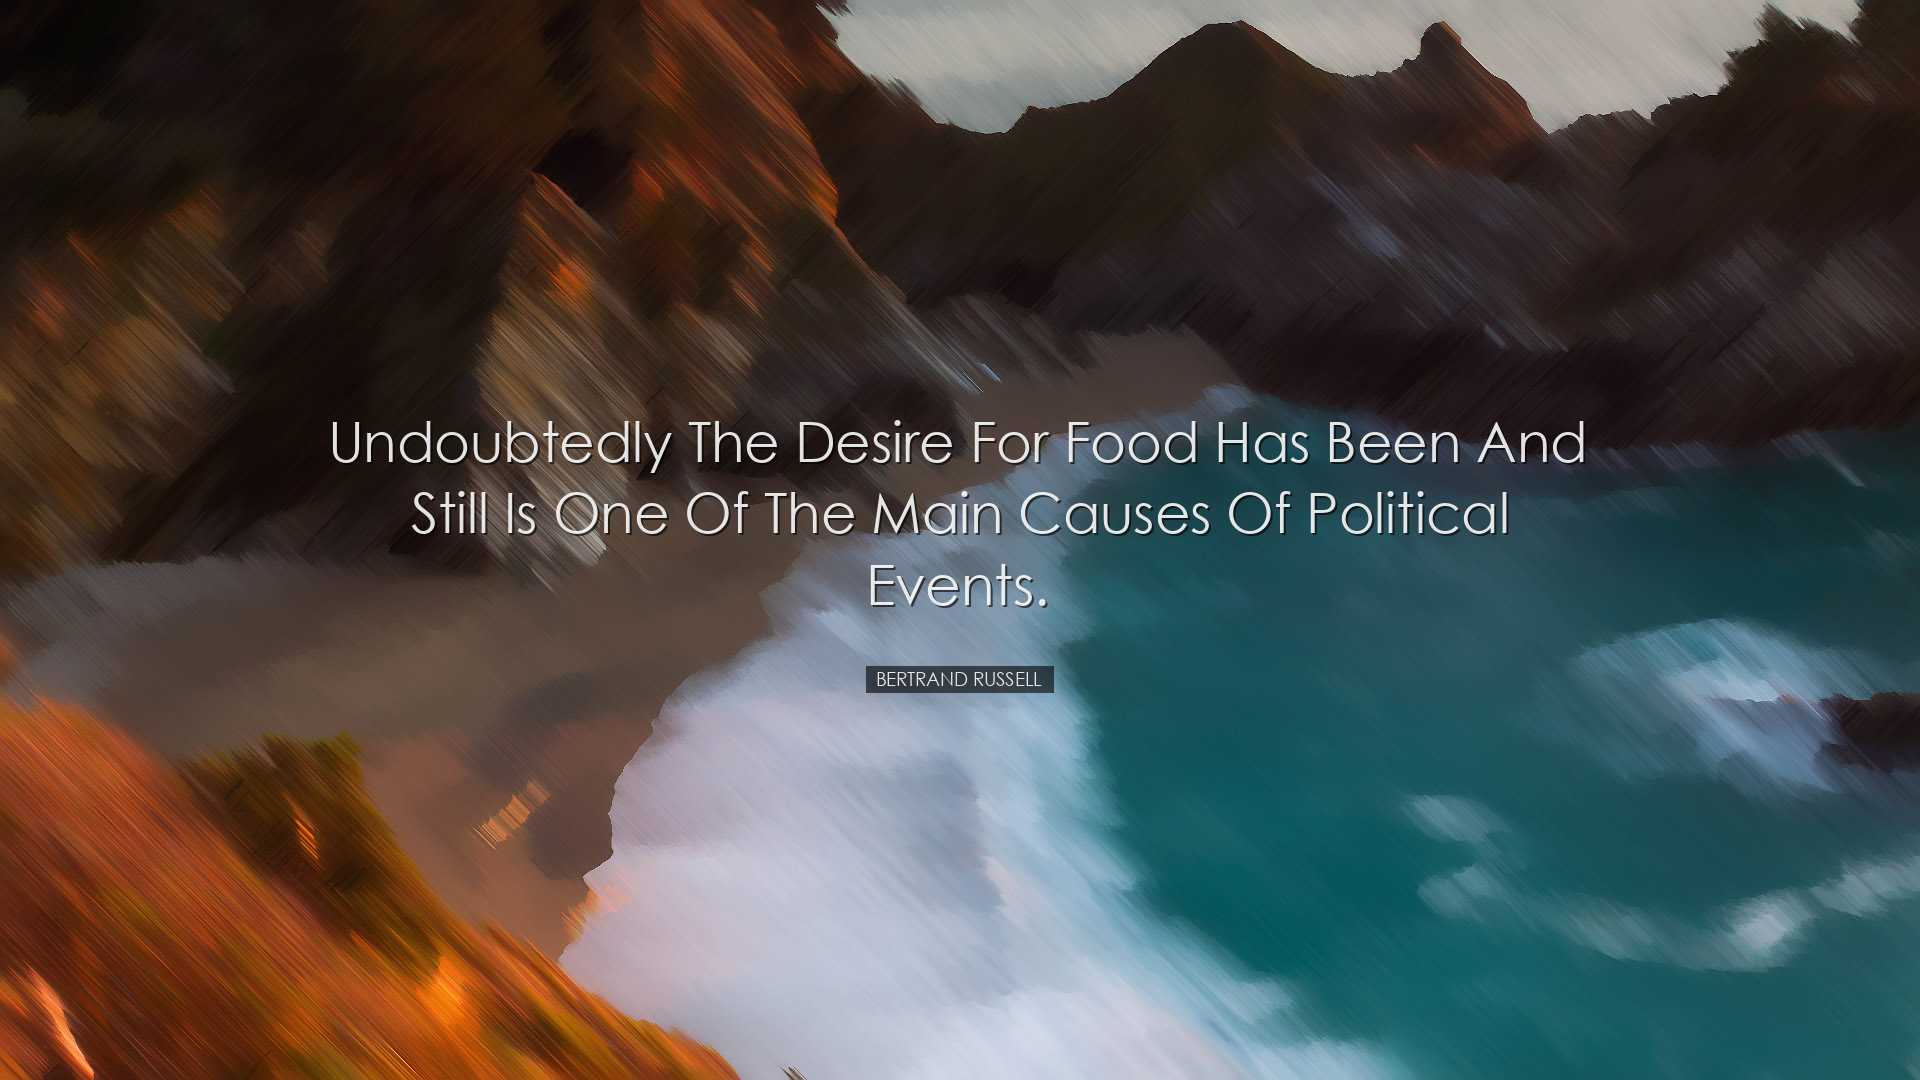 Undoubtedly the desire for food has been and still is one of the m